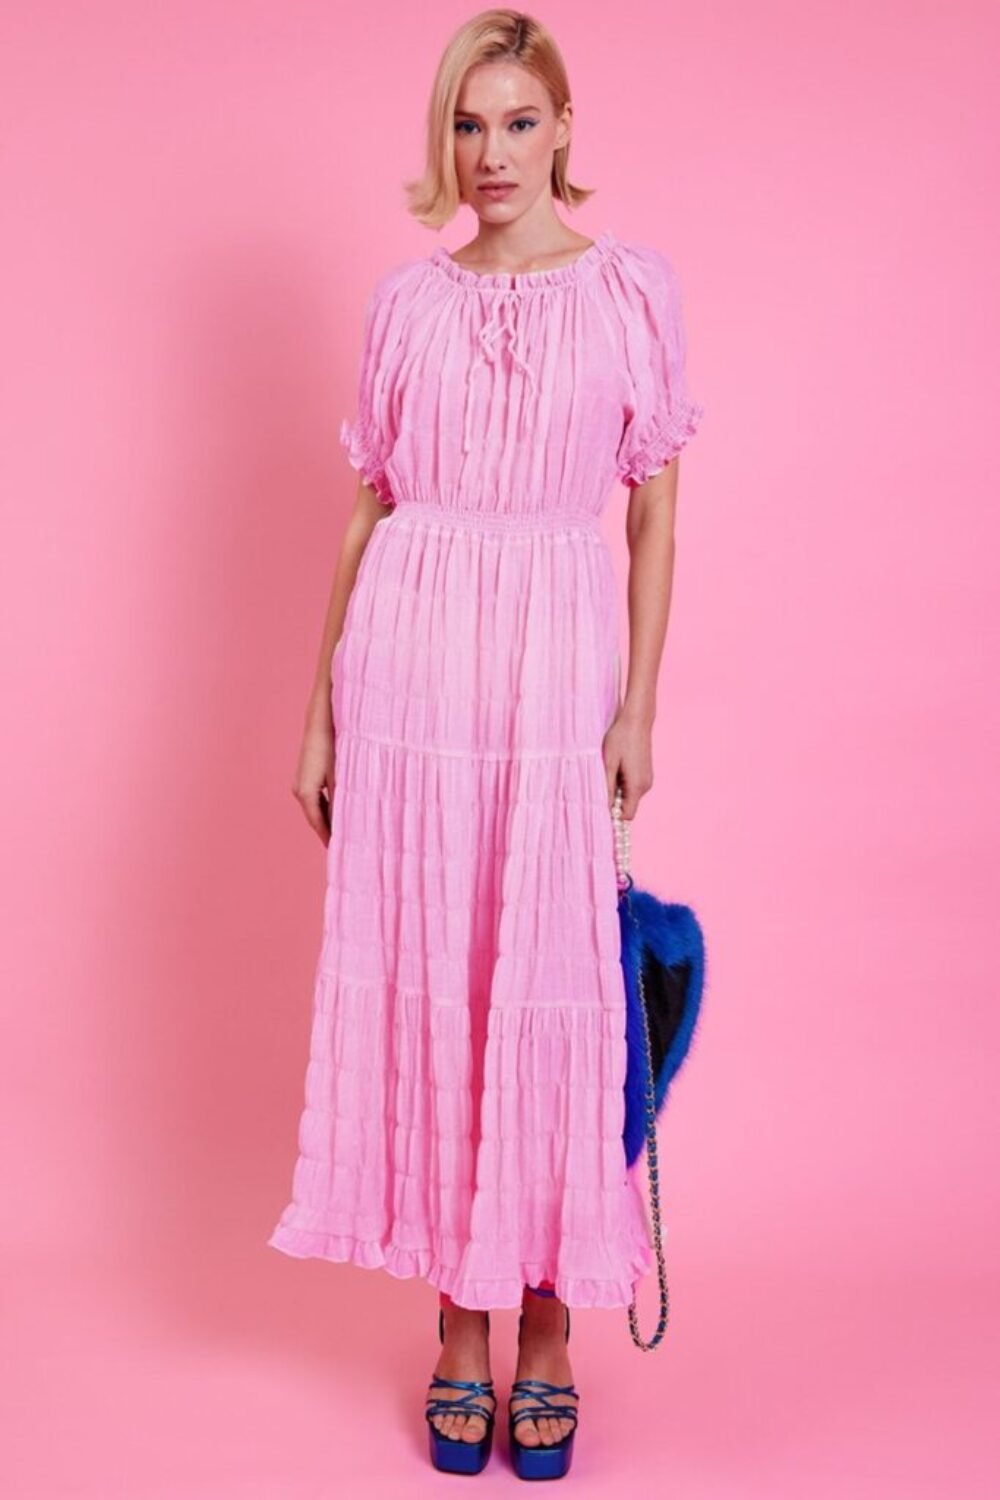 Shop Lux Pink Silk Blend Maxi Ruffle Dress and women's luxury and designer clothes at www.lux-apparel.co.uk